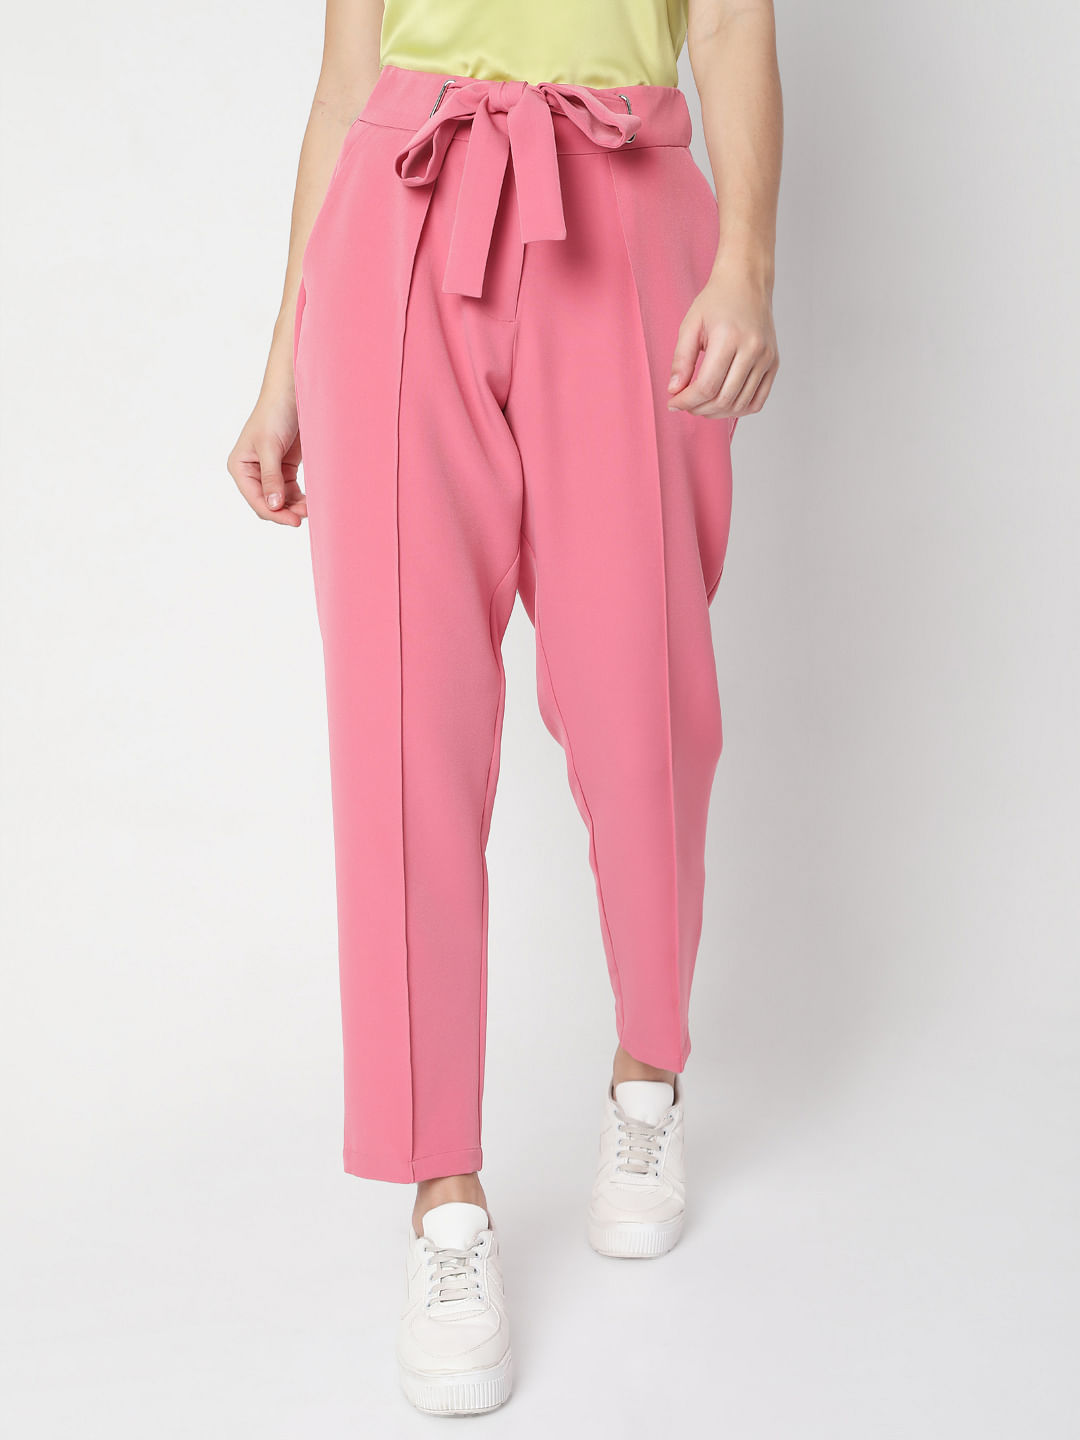 Tailor To You in Pink – Oh Polly US